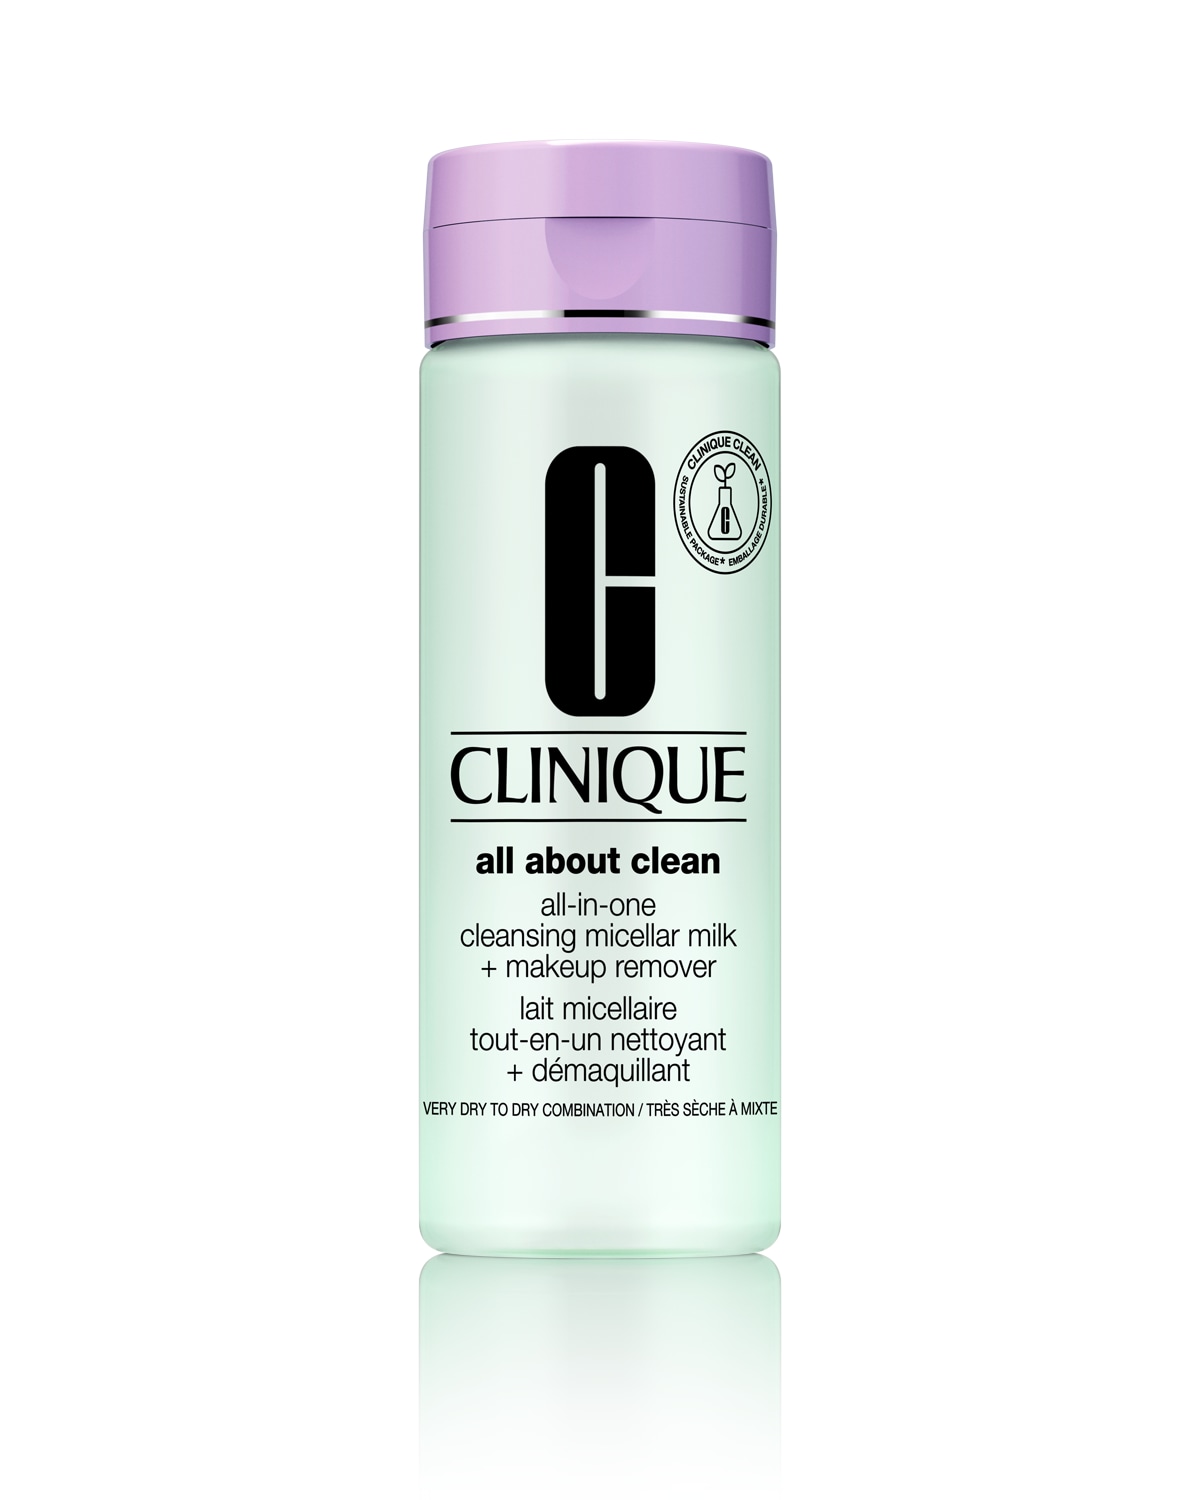 All-in-One Cleansing Micellar Milk + Makeup Remover <Skin Type 2 and 3>